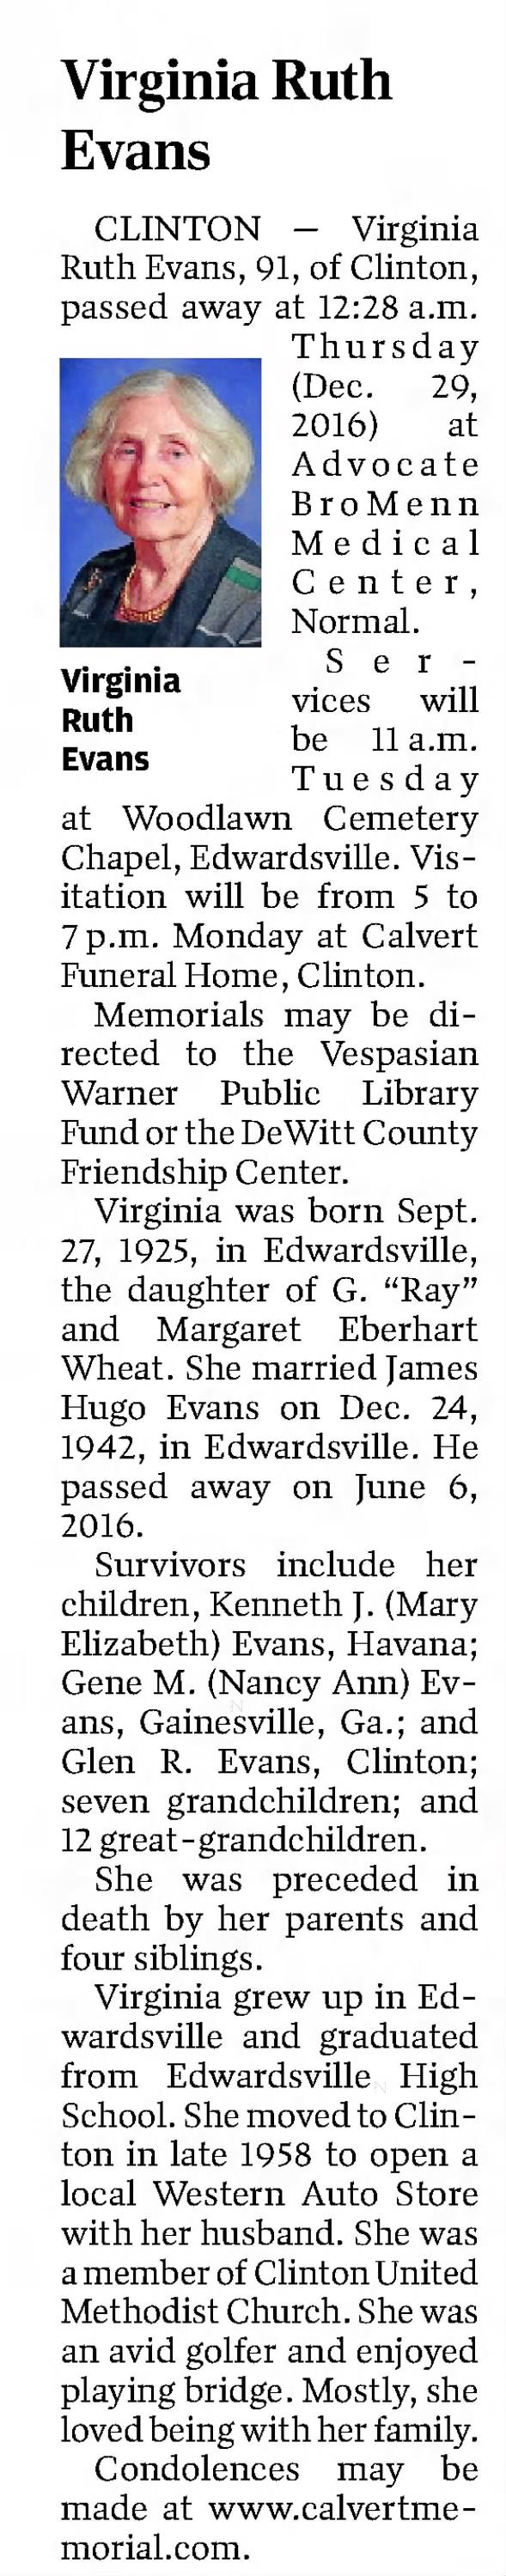 Obituary for Virginia Ruth Evans, 1925-2016 (Aged 91)